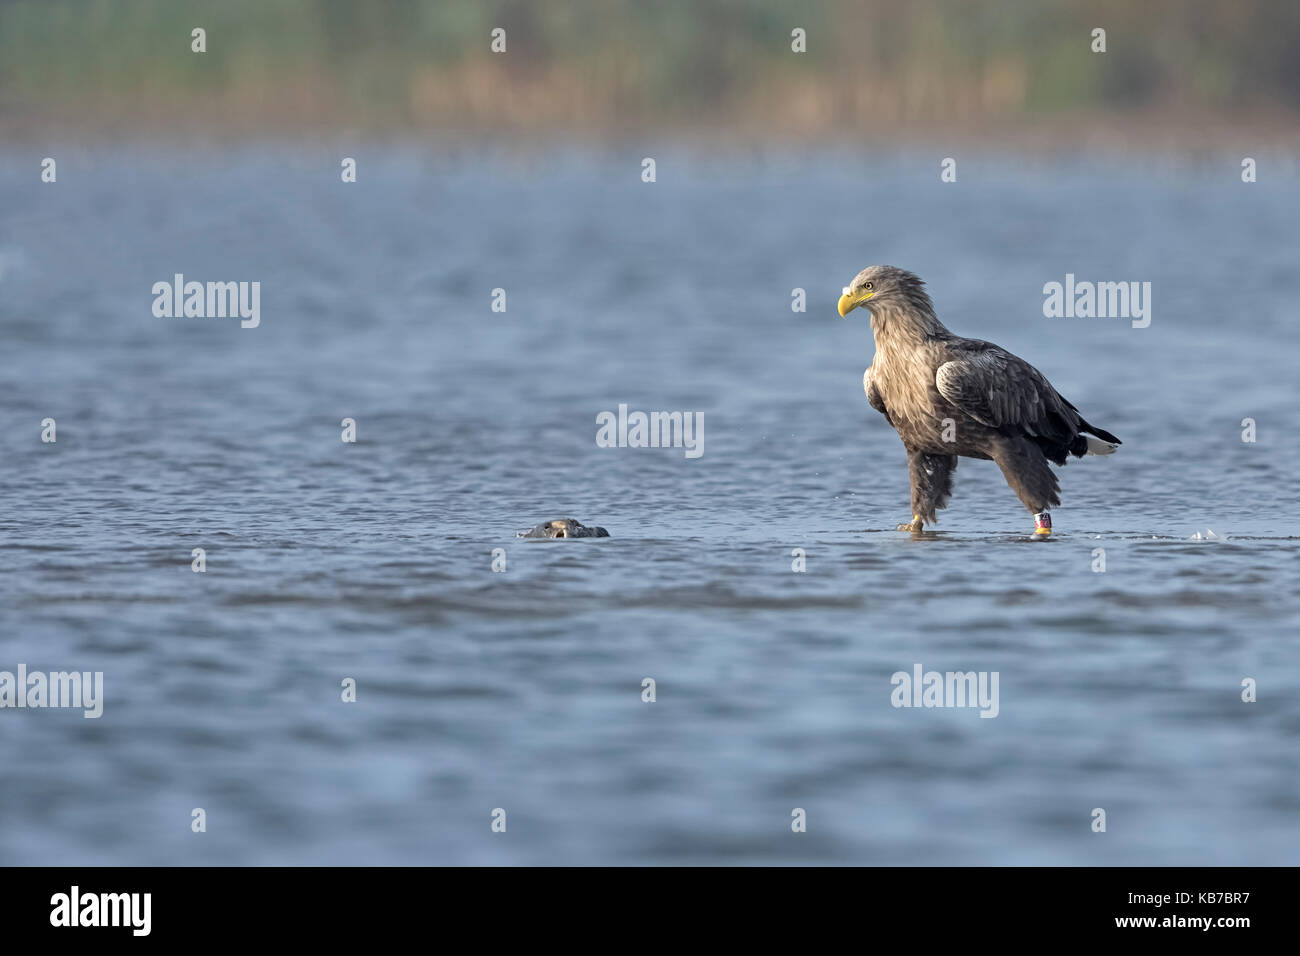 White-tailed eagle (Haliaeetus albicilla) looking at his just caught prey and standing in shallow water, The Netherlands, Overijssel, Kampen, Ketelmeer Stock Photo